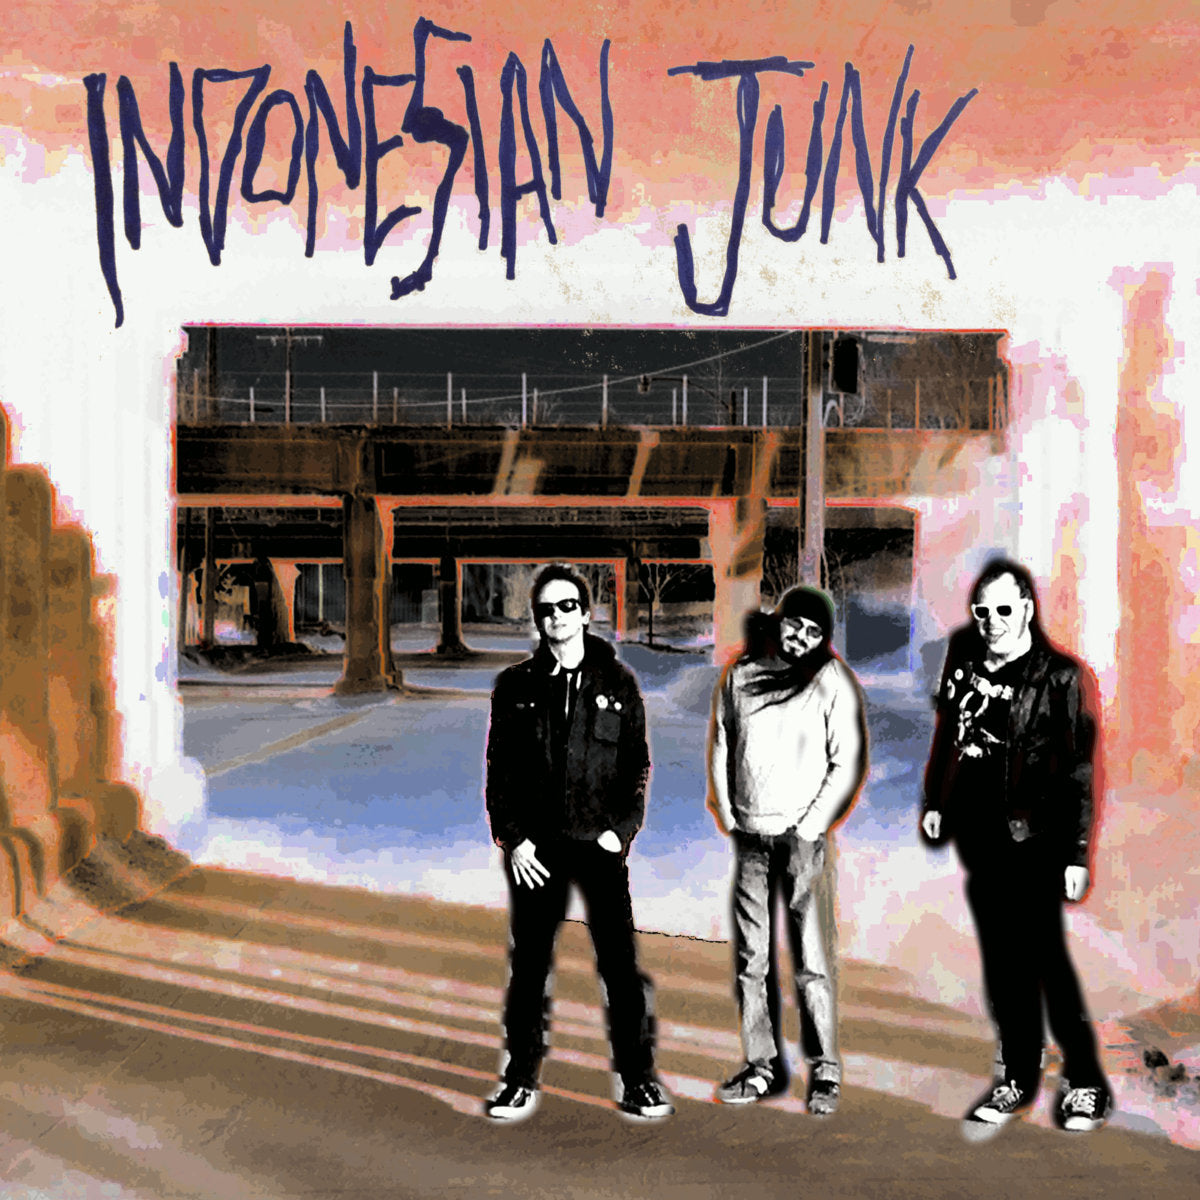 Indonesian Junk- S/T LP ~RARE CLEAR WAX LIMITED TO 100!